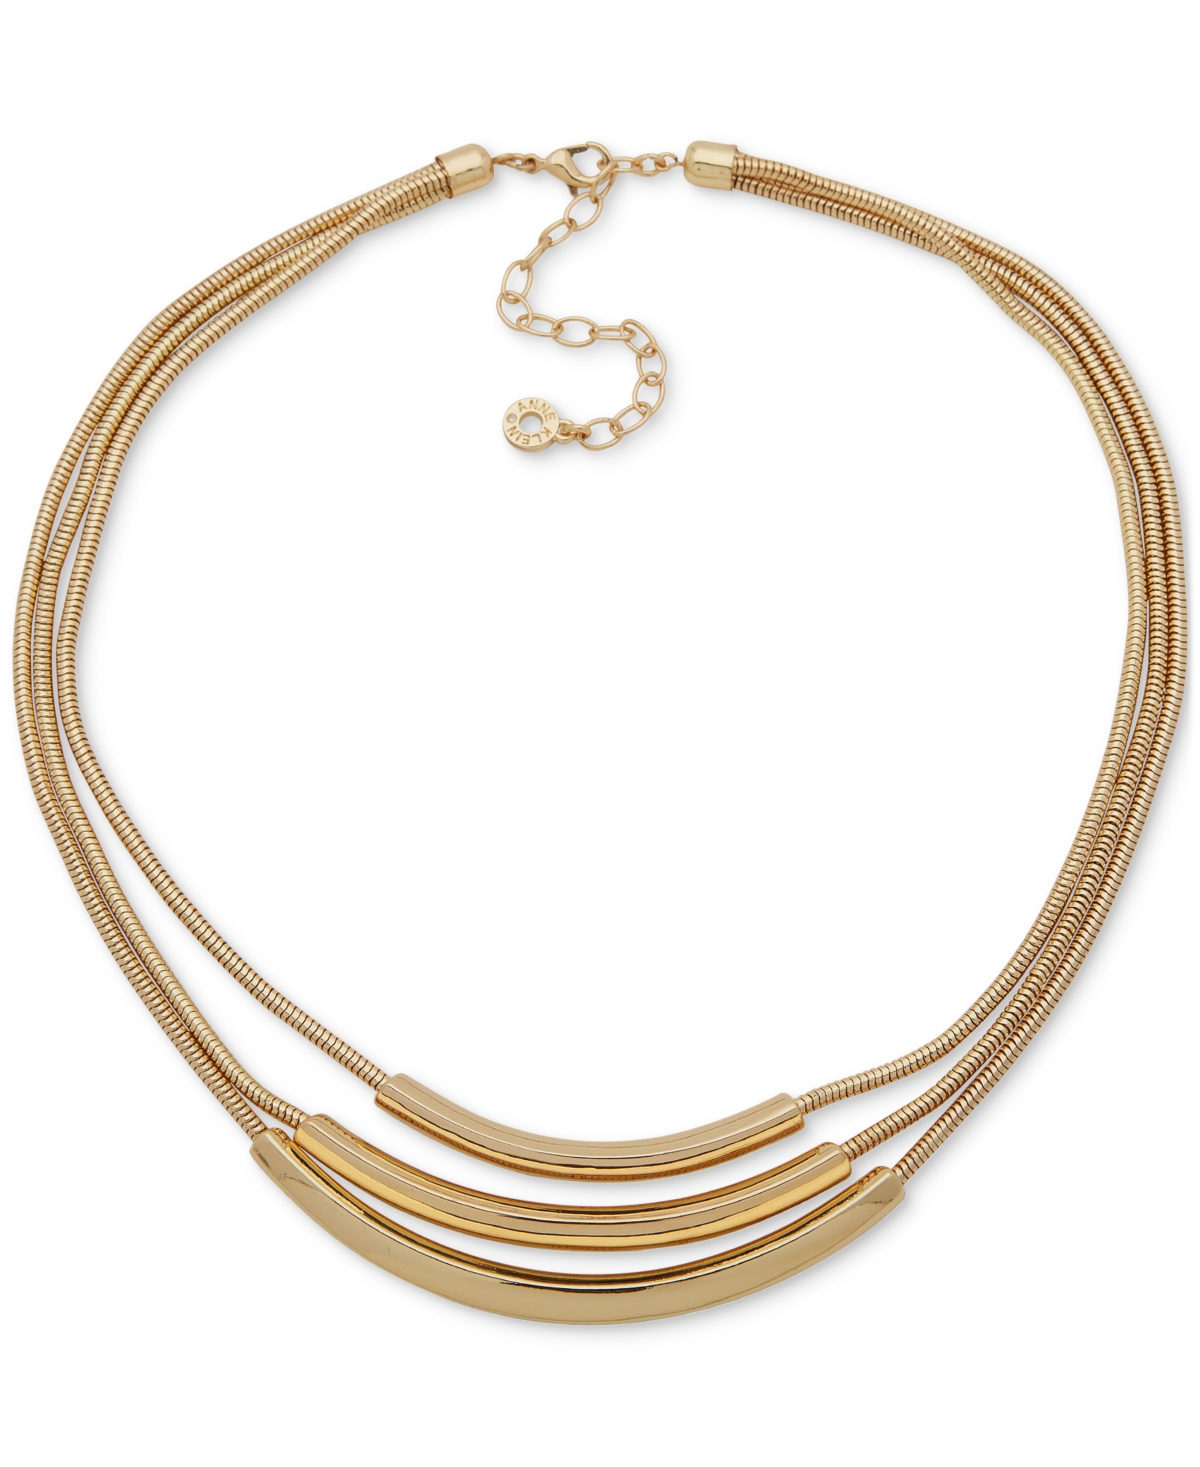 Shop Anne Klein Gold-tone Curved Bar Layered Collar Necklace, 16" + 3" Extender